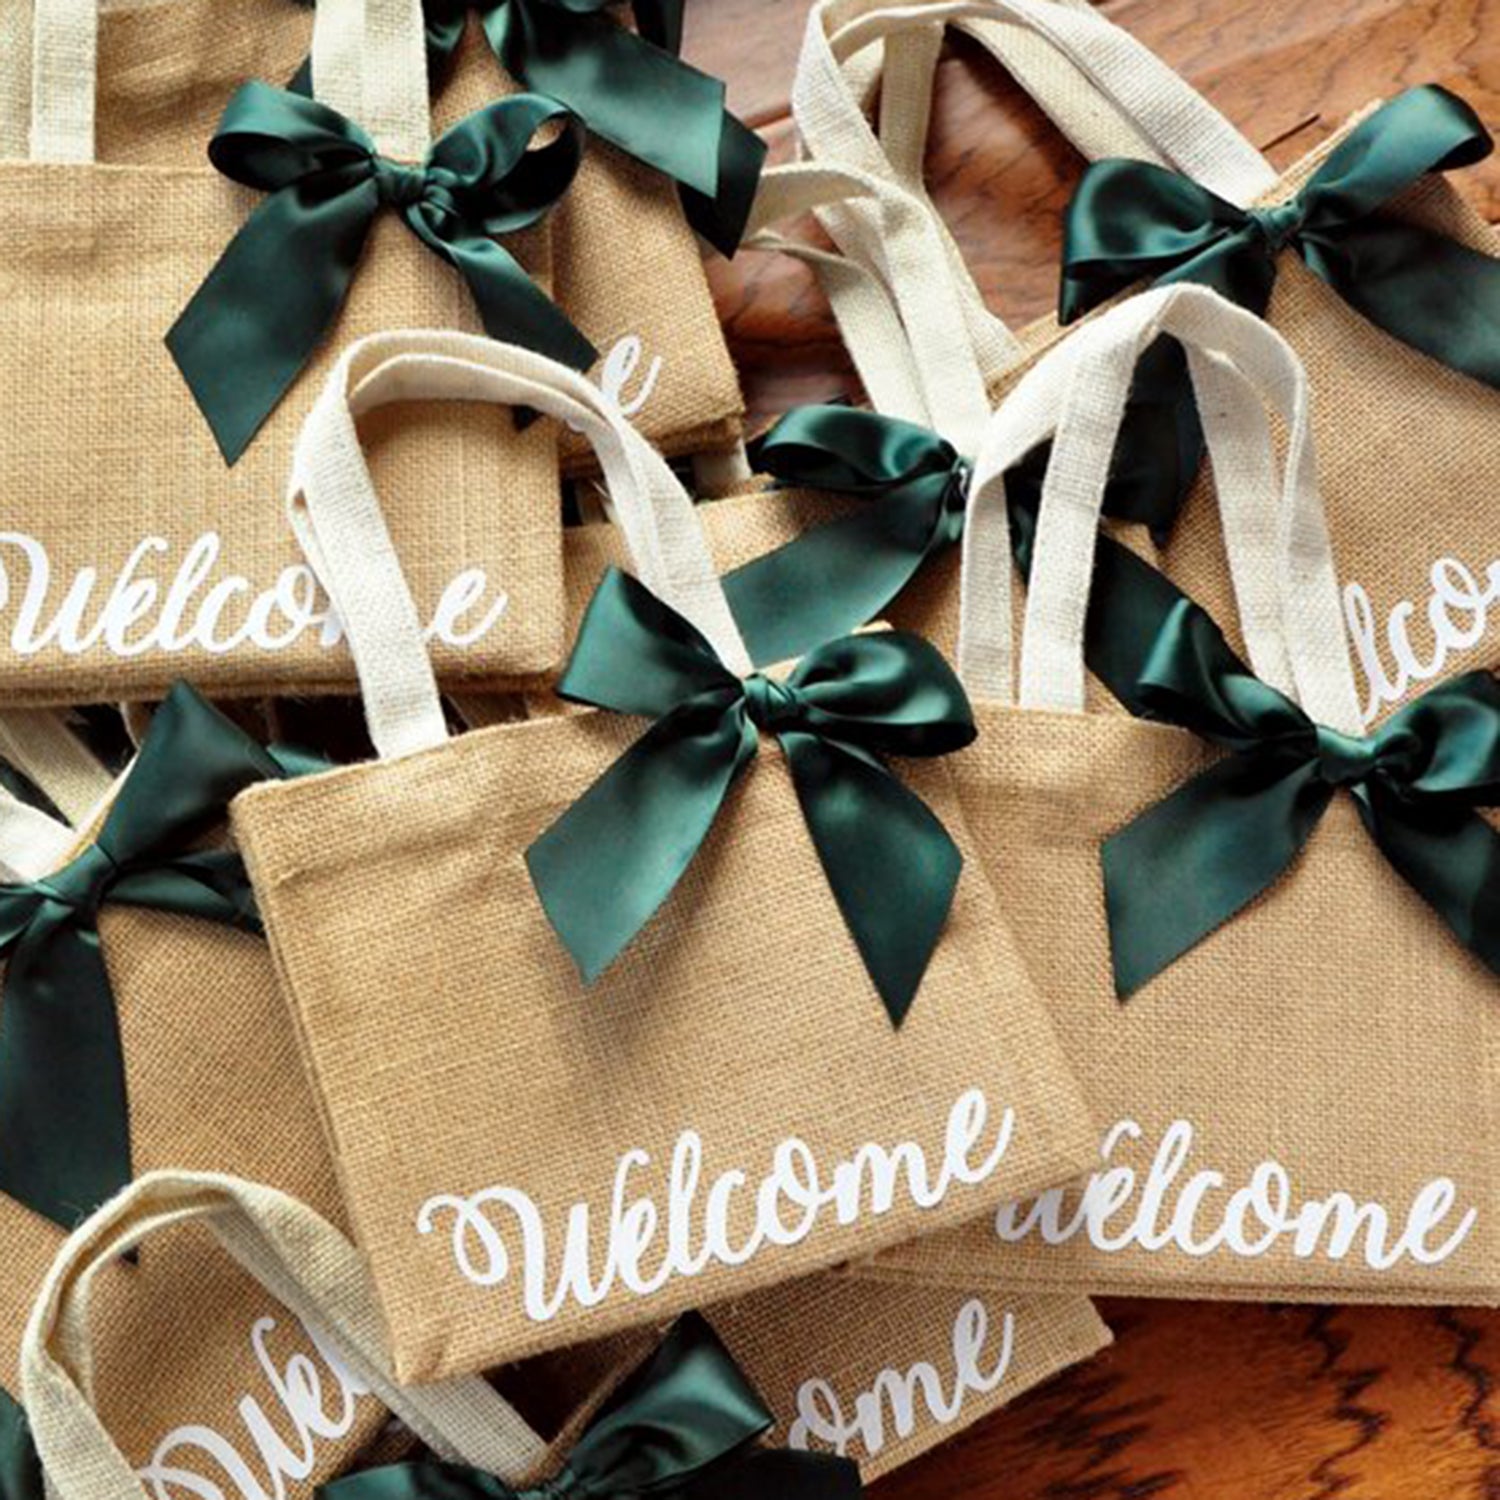 welcome bags